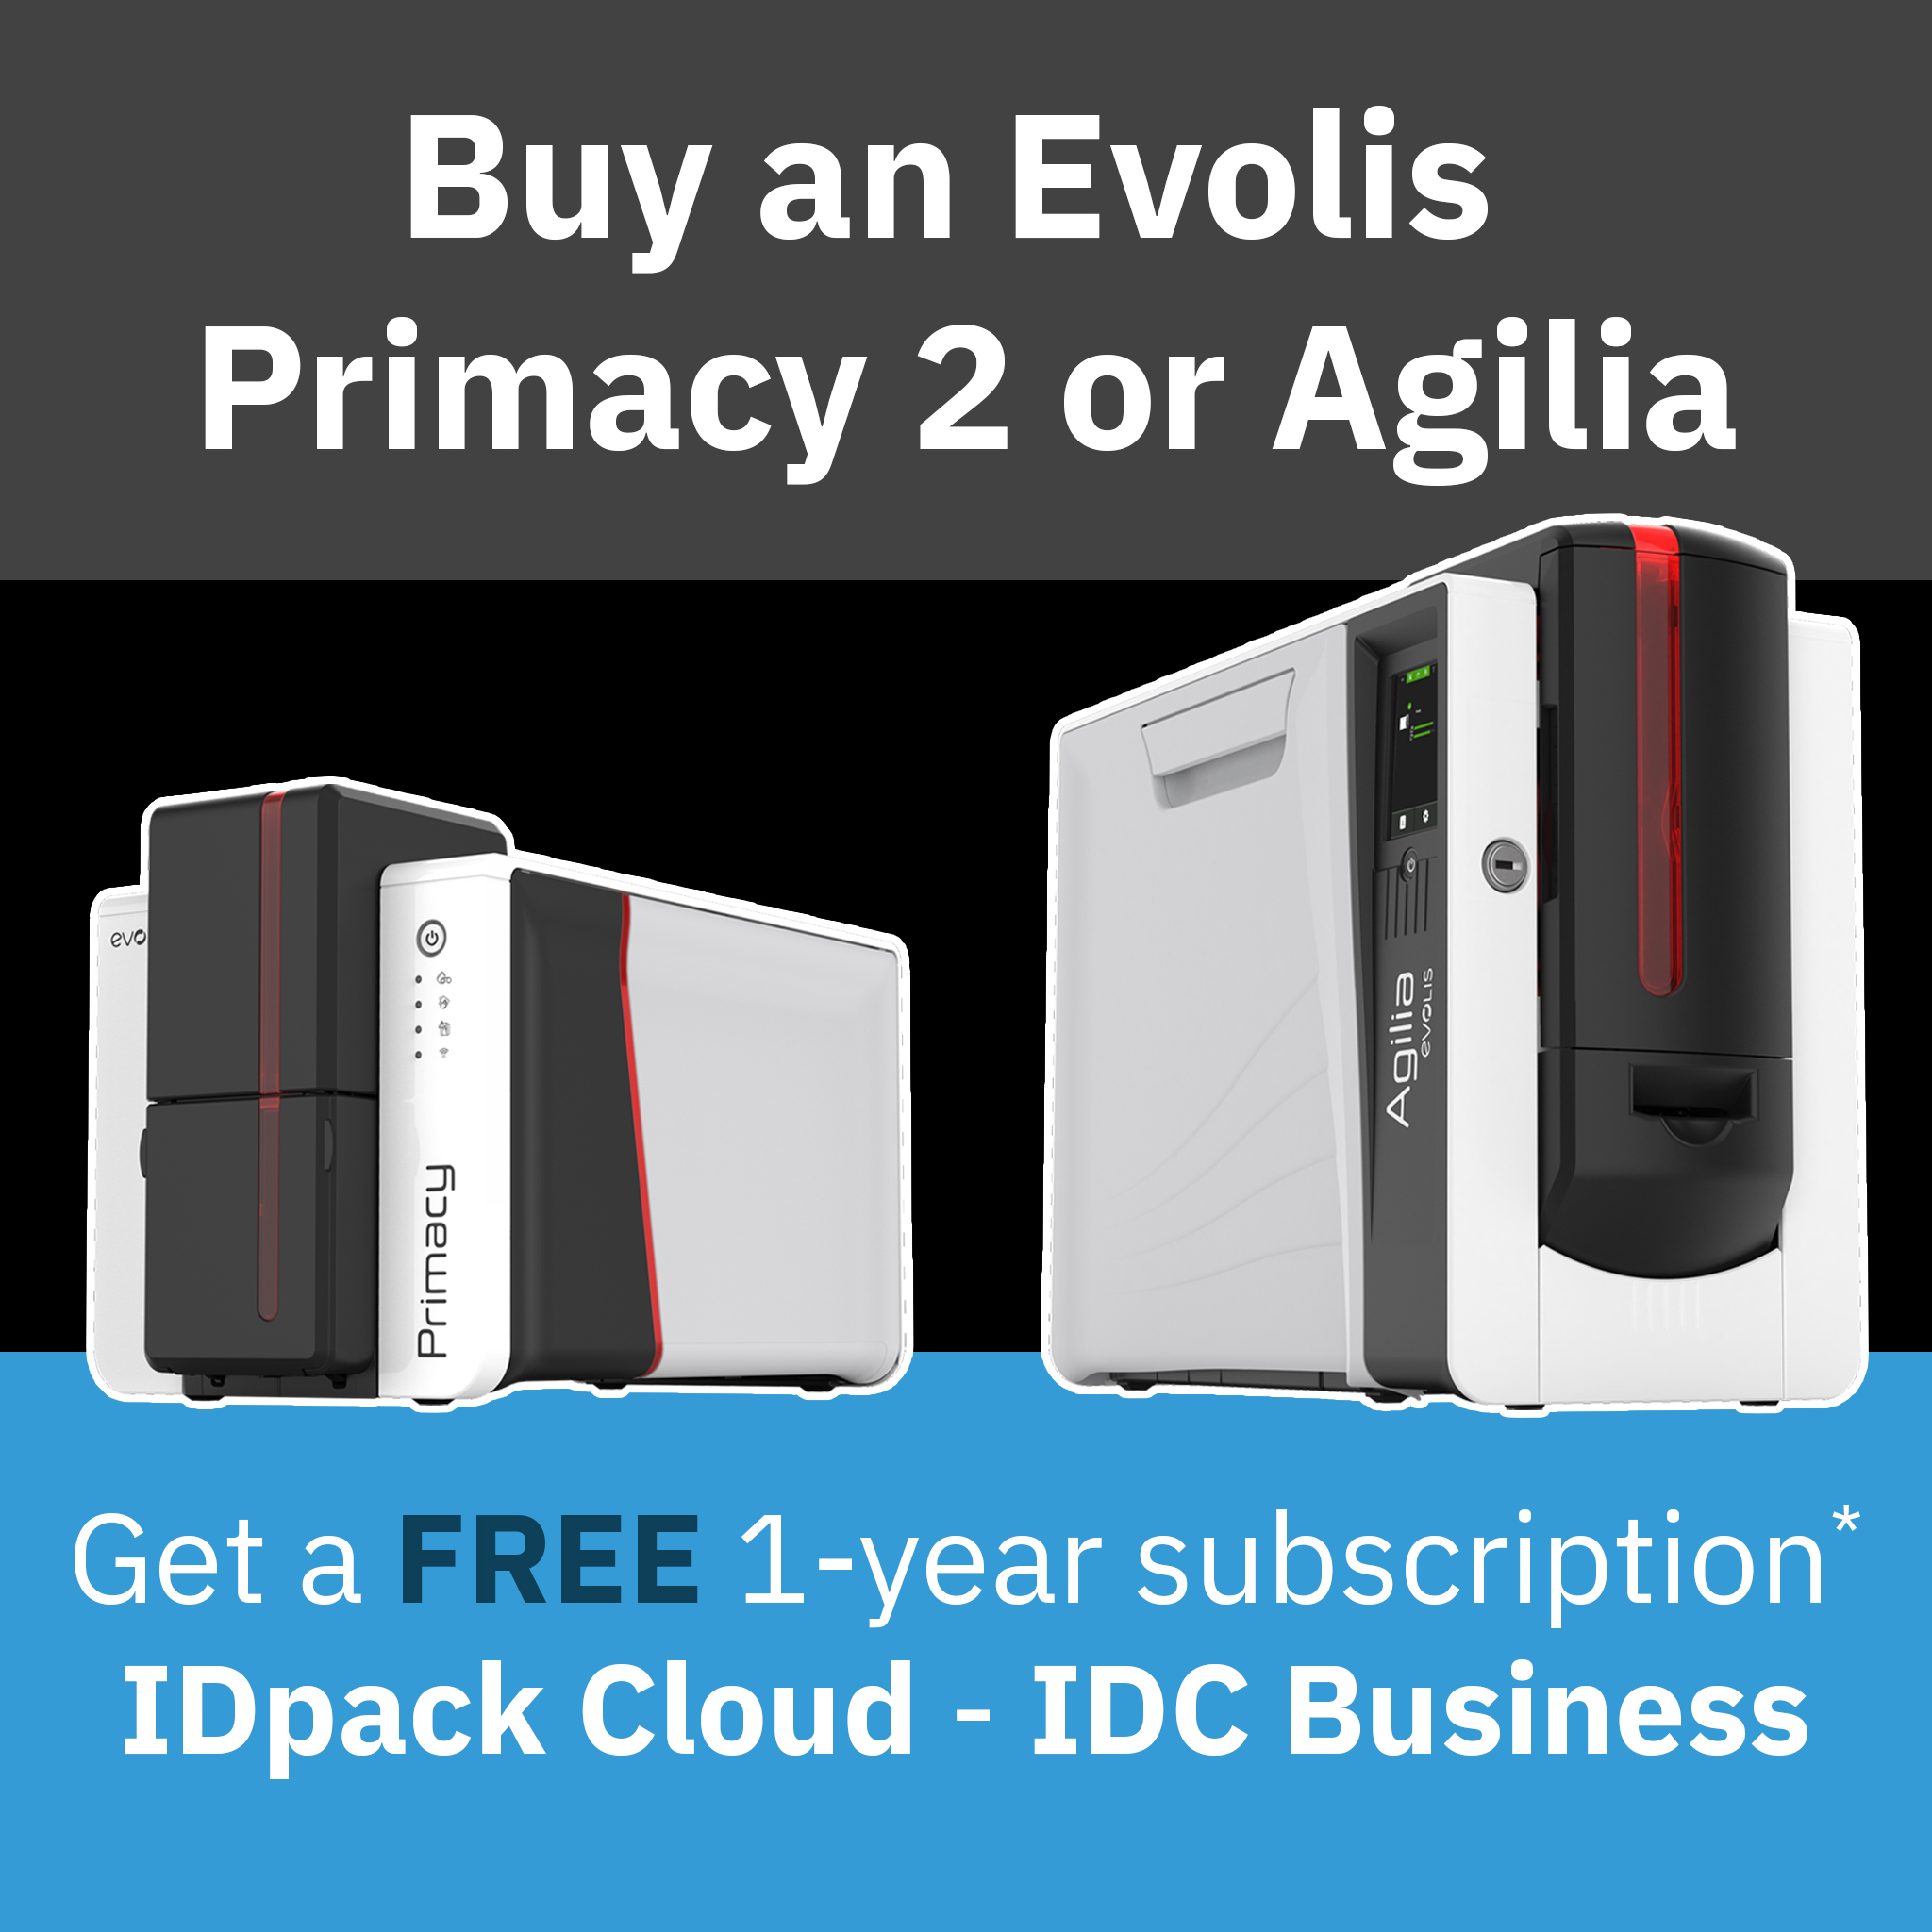 Buy an Evolis Primacy 2 or Agilia card printer and get a 1-year free subscription to IDC Business